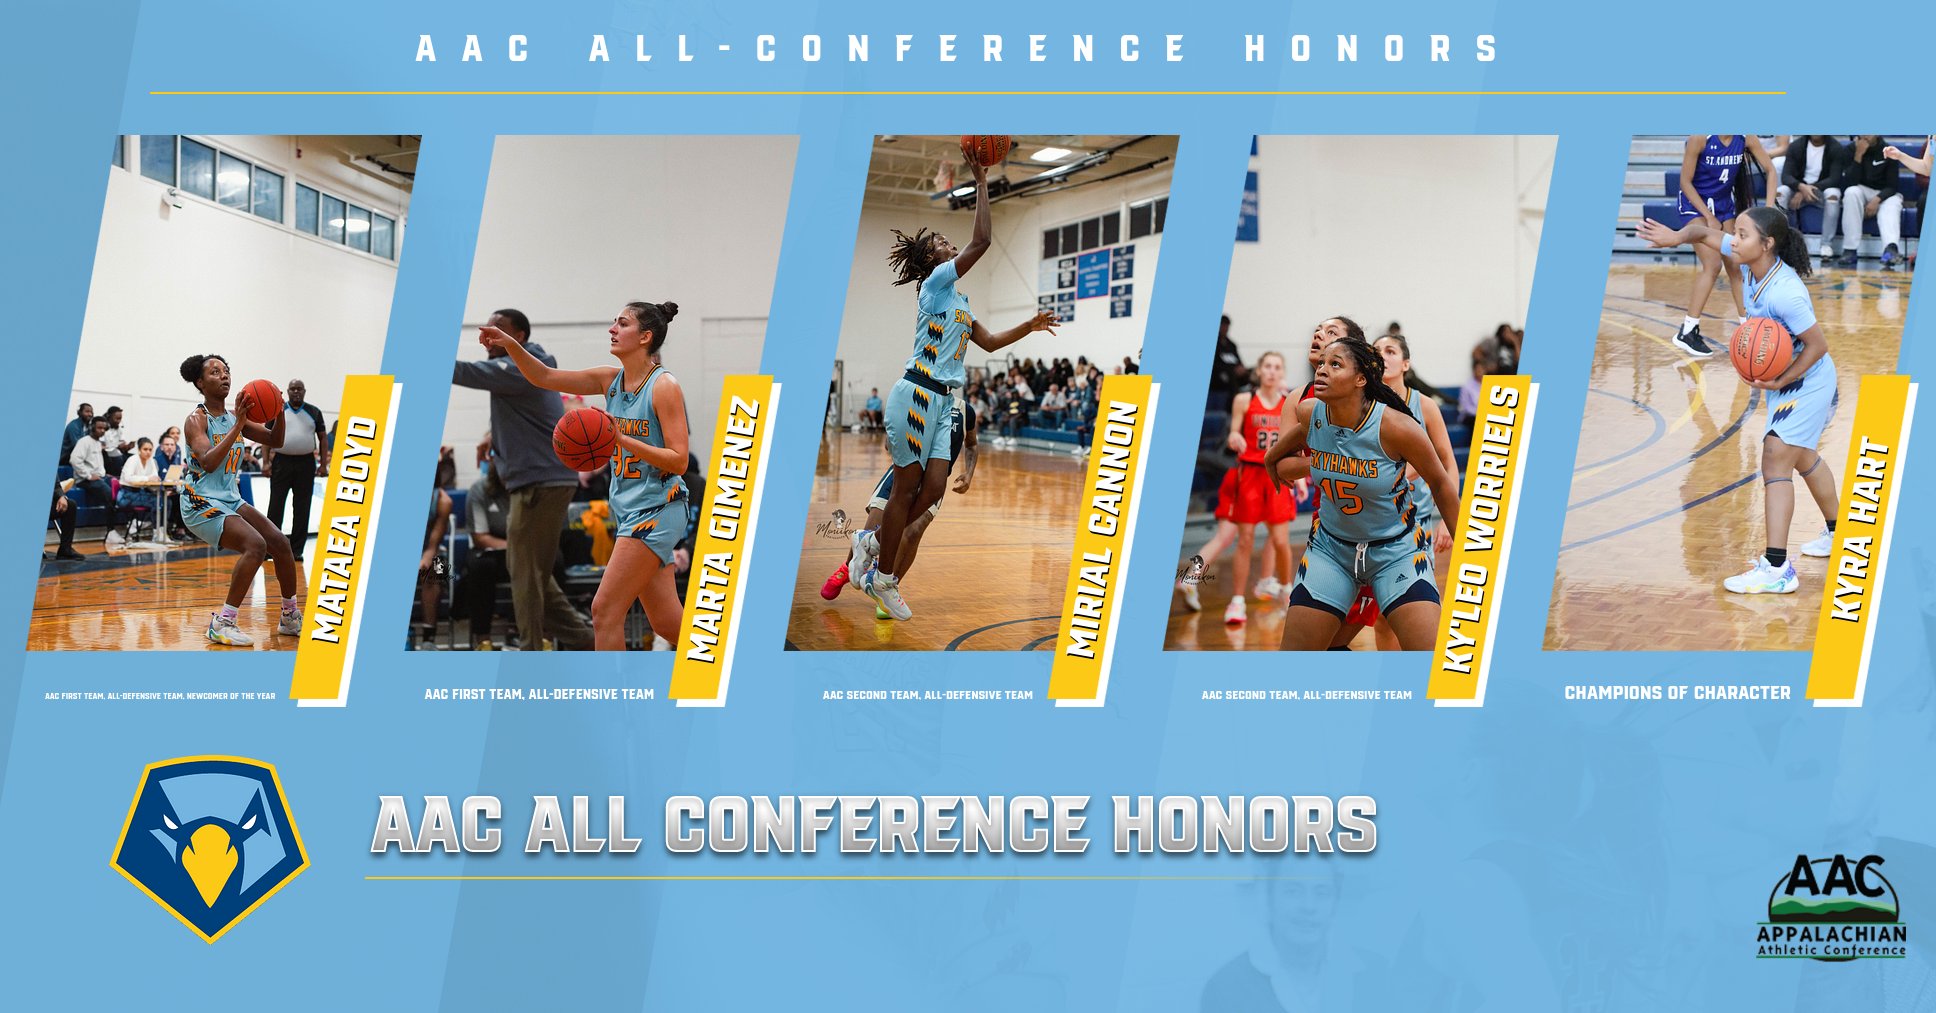 Women’s Basketball adds All-Conference Honors to their big season